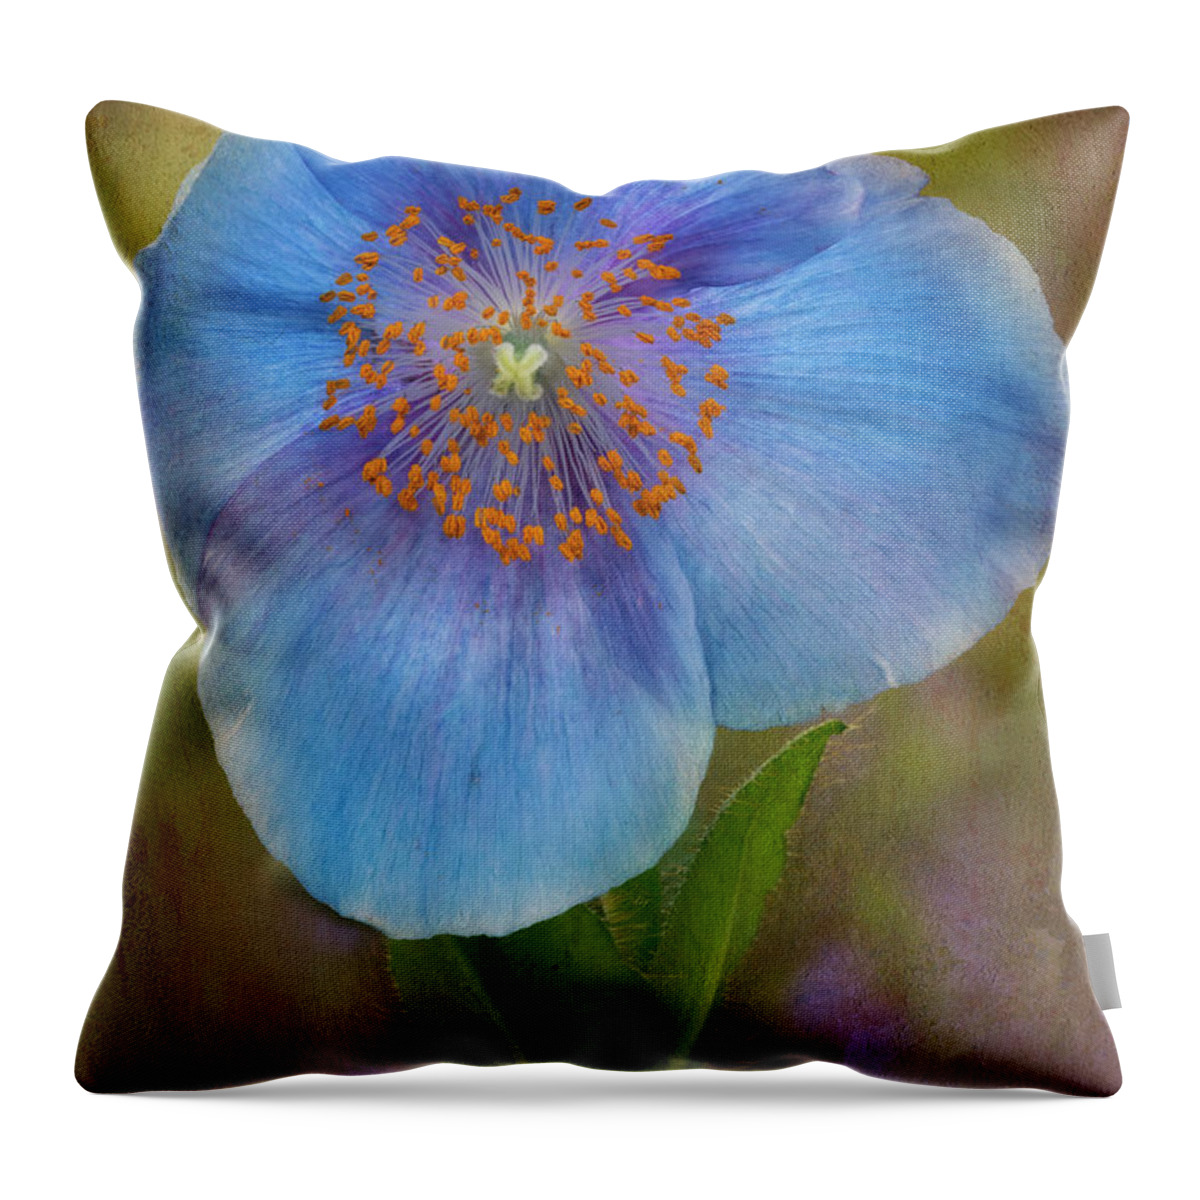 Poppy Throw Pillow featuring the photograph Textured Blue Poppy Flower by Susan Candelario